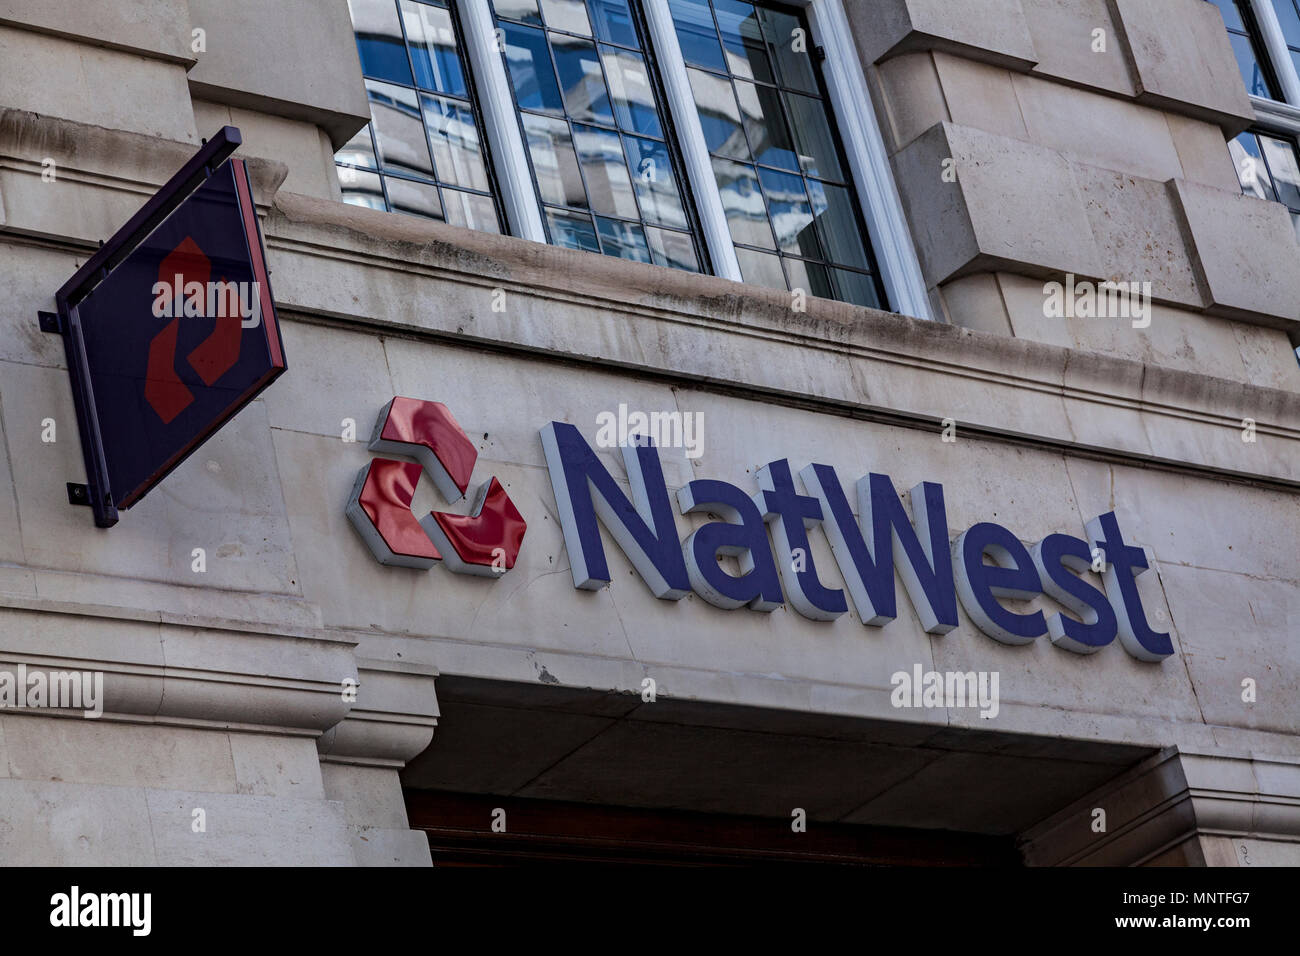 Natwest bank on Sloane Square in Chelsea, London Stock Photo